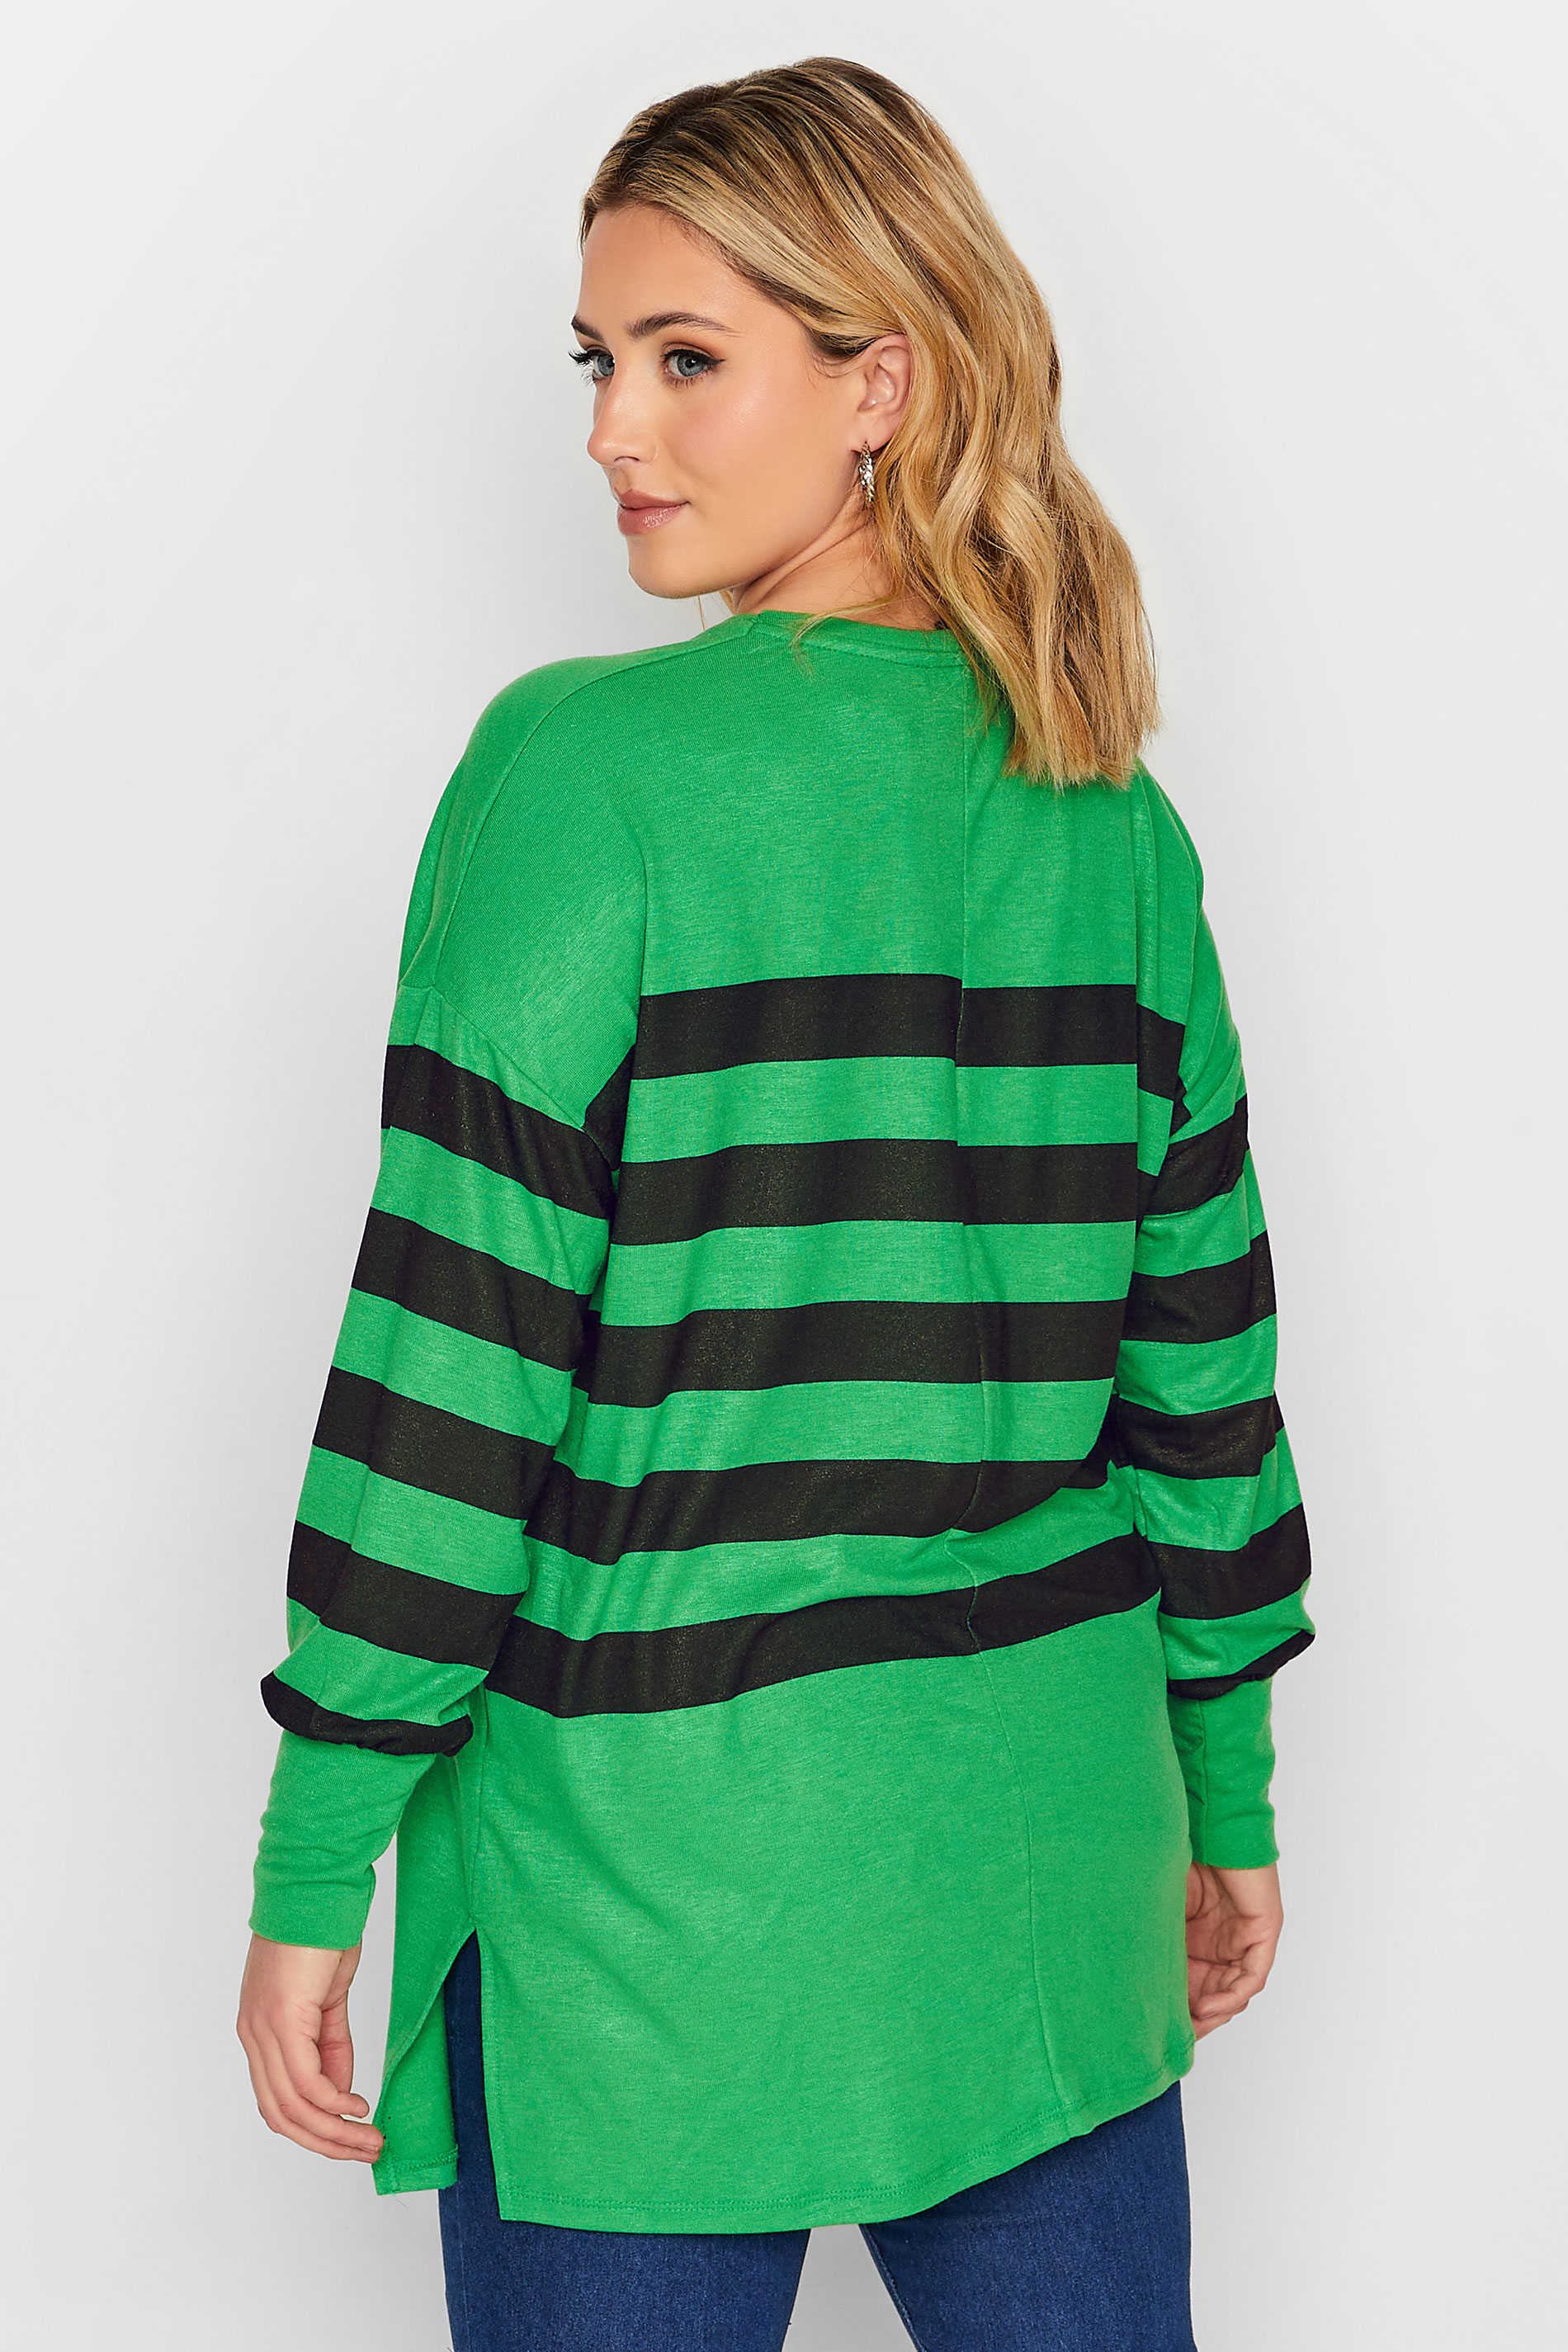 YOURS LUXURY Curve Green Stripe V-Neck Top | Yours Clothing 3